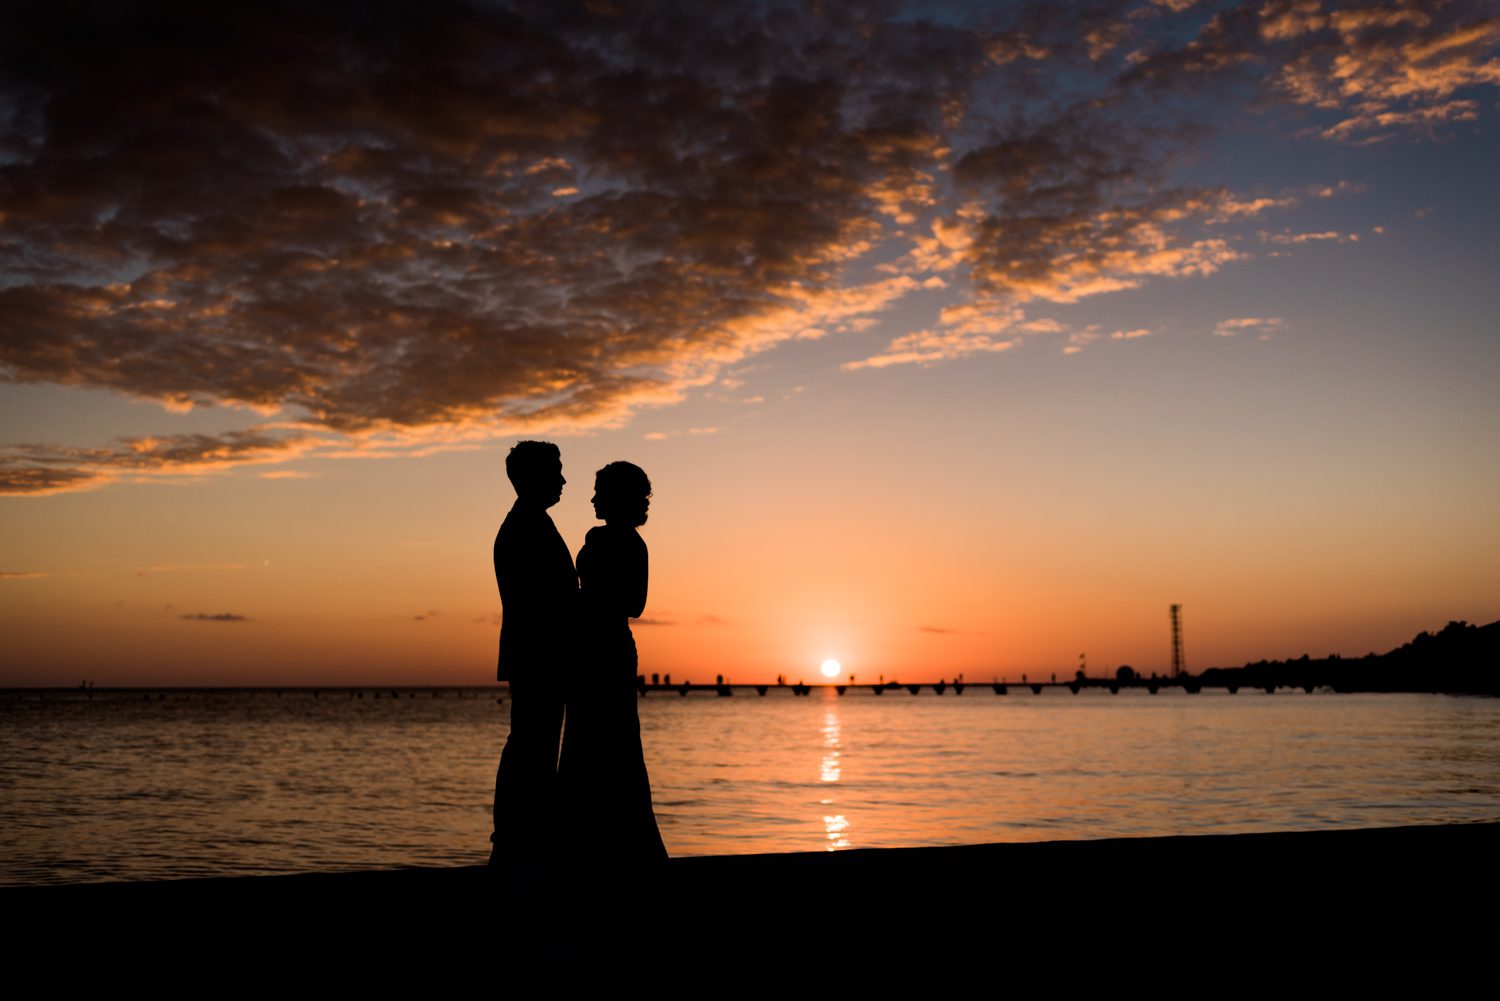 A silhouette of a couple standing on the beach at sunset, capturing the romantic ambiance of a Key West garden club wedding.